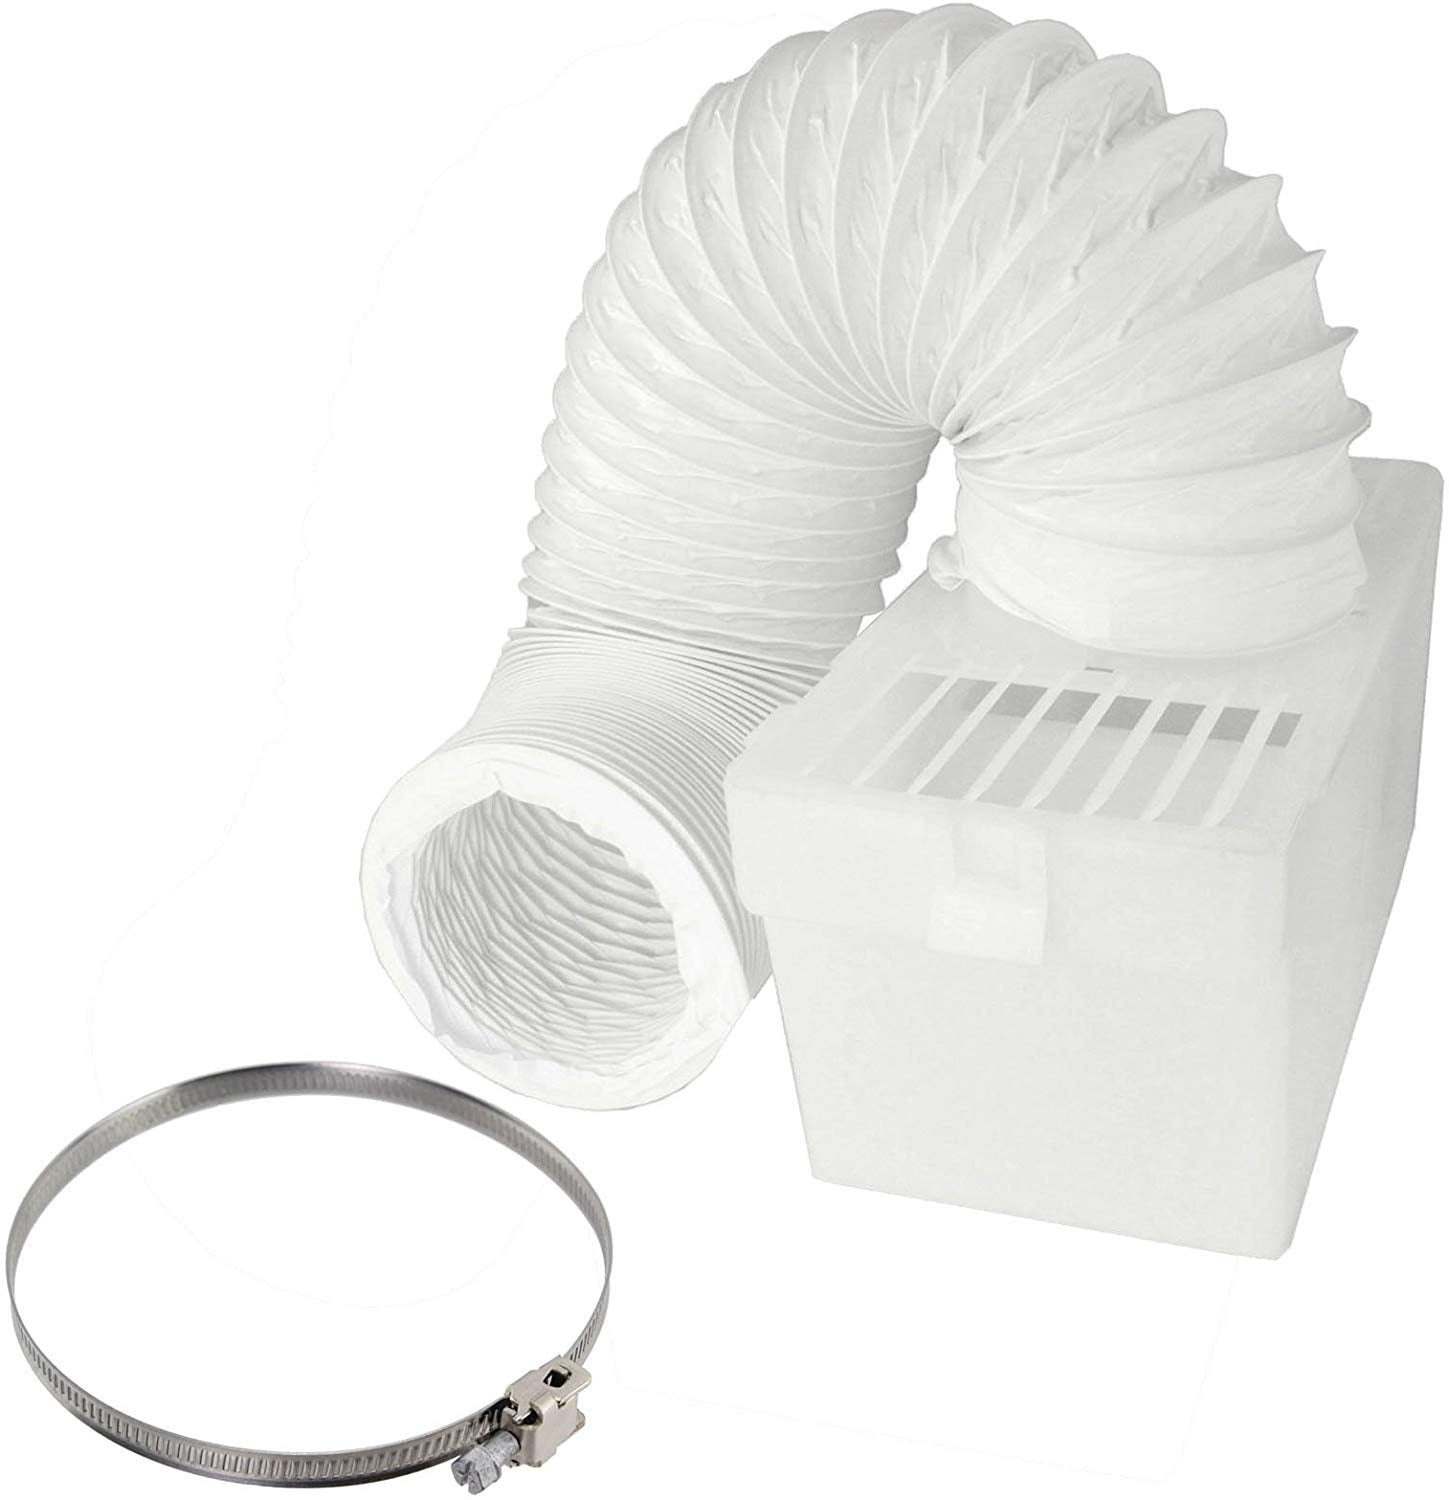 Condenser Vent Box & Hose Kit With Screw Clip for Samsung Vented Tumble Dryer (4" / 100mm Diameter)